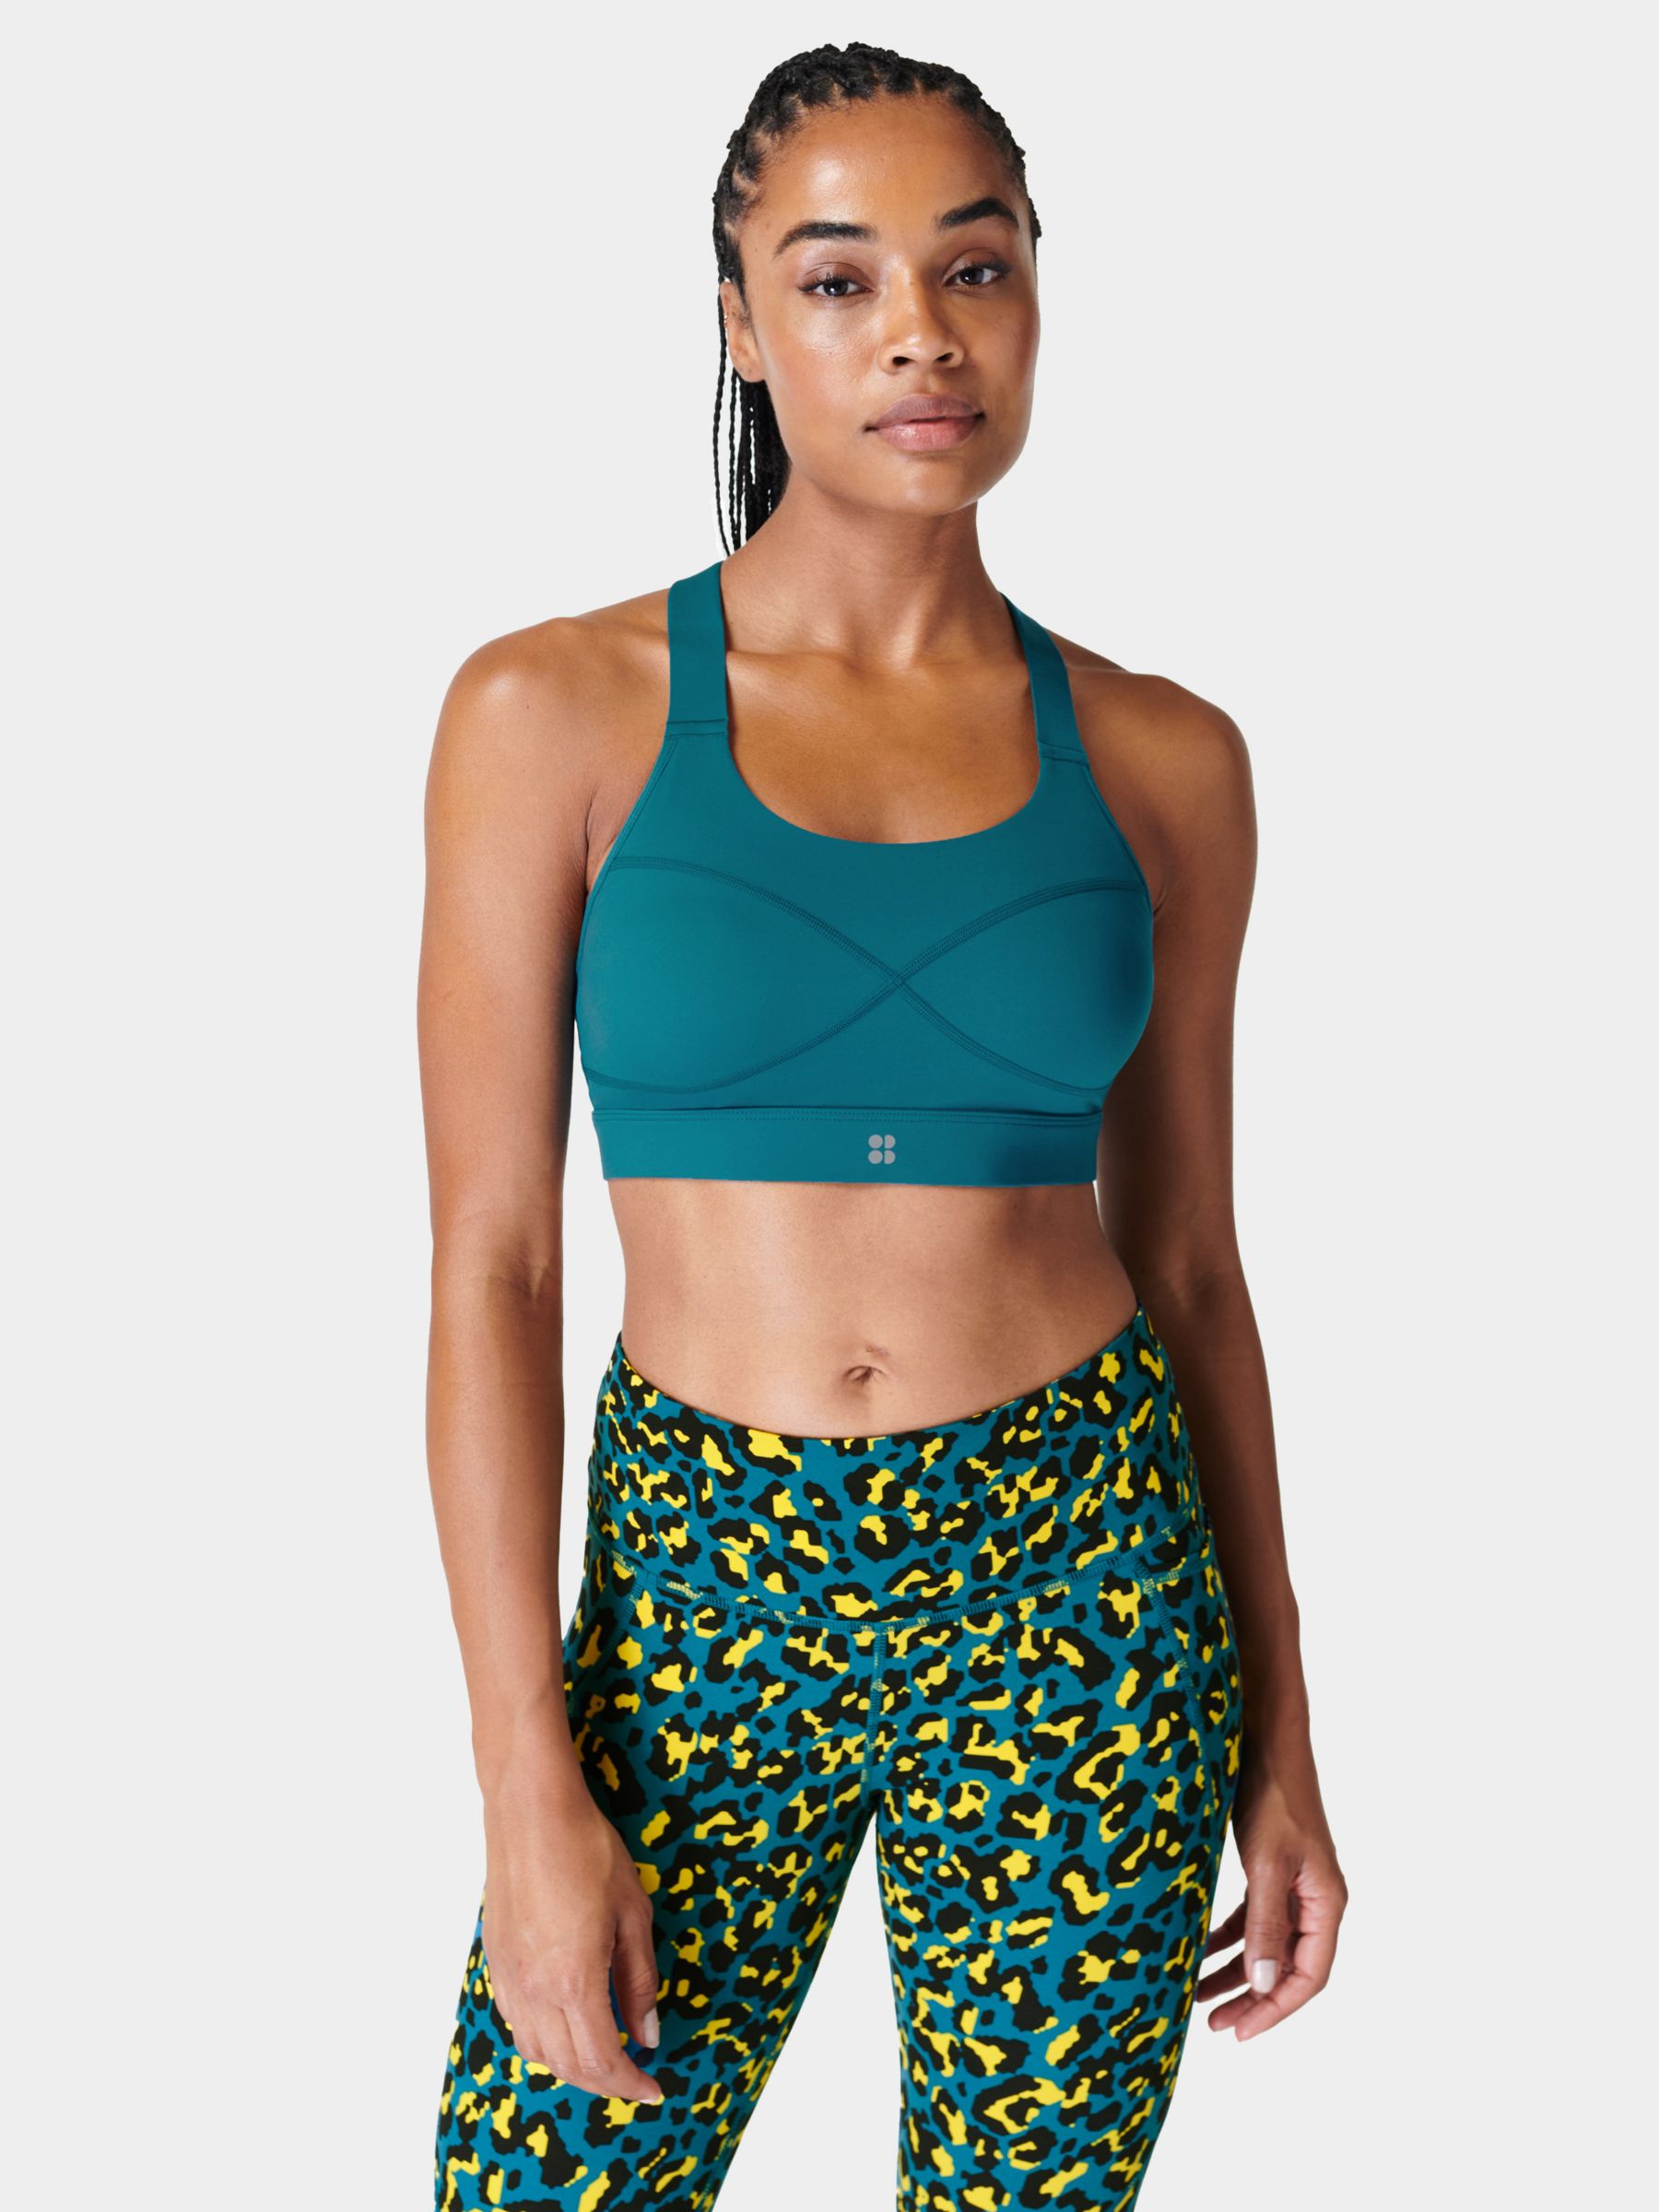 Buy Medium Impact Padded Non-Wired Sports Bra in Teal Blue with